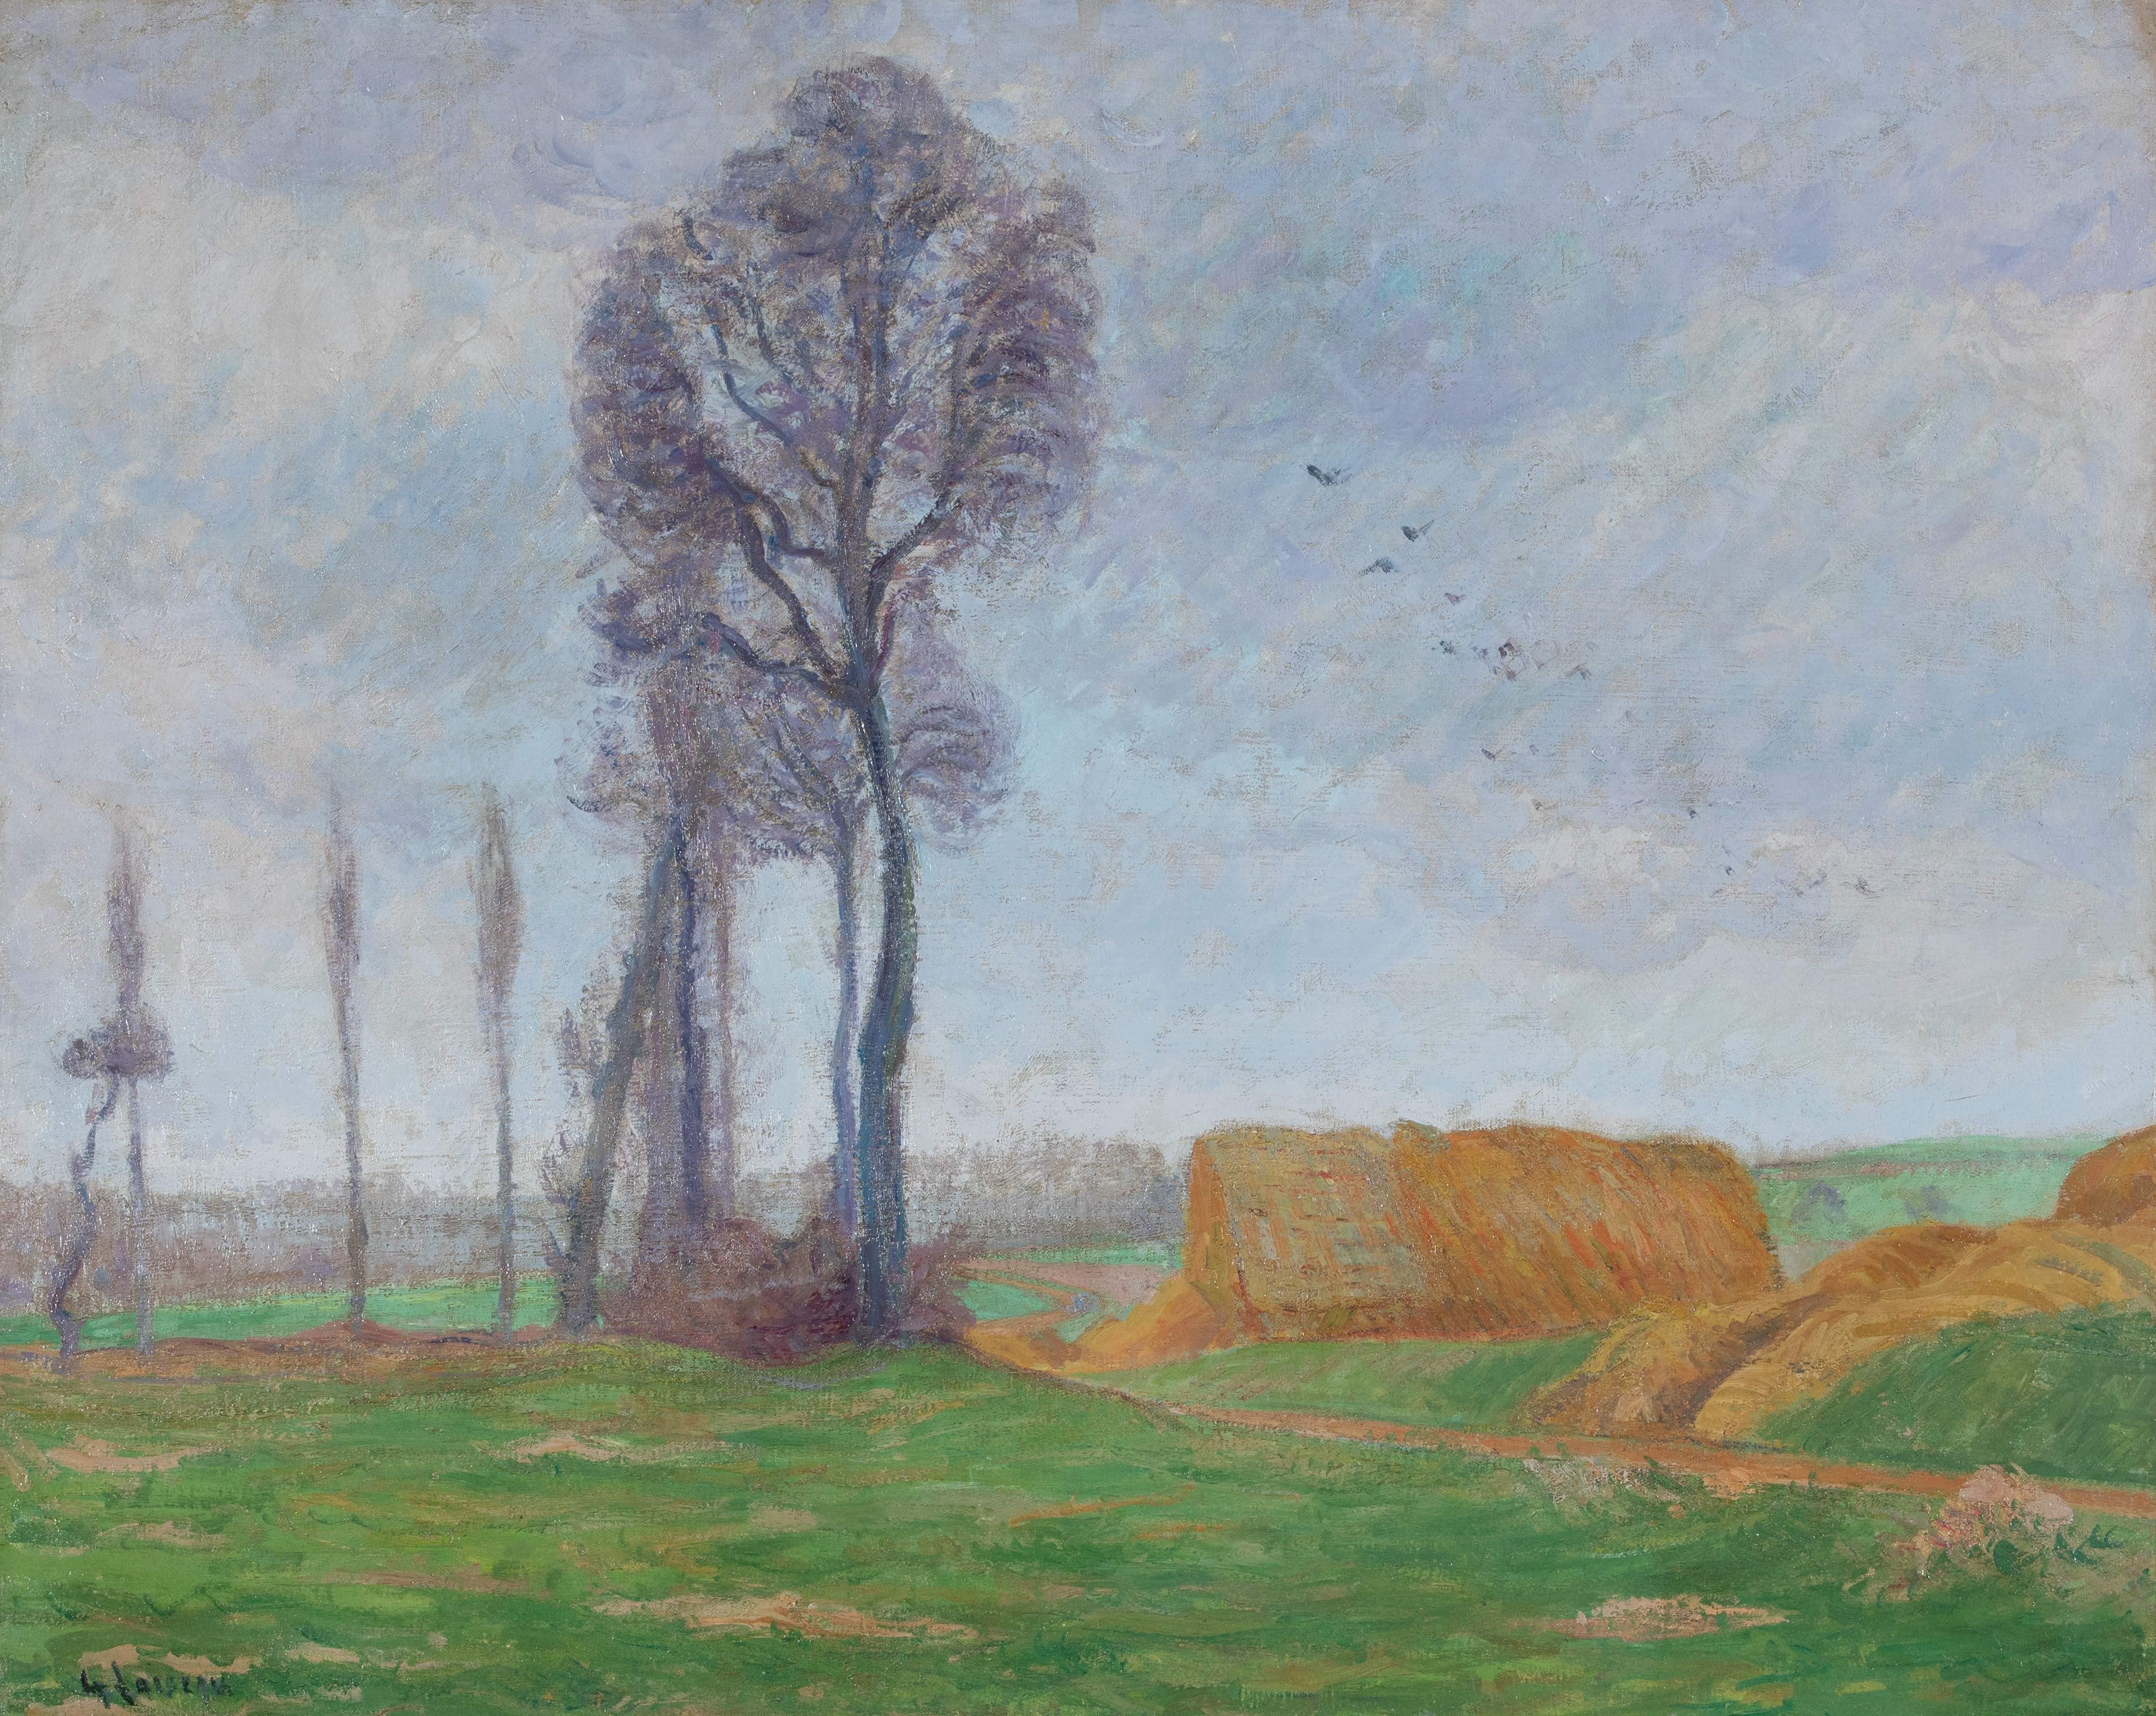 *PLEASE NOTE UK BUYERS WILL ONLY PAY 5% VAT ON THIS PURCHASE.

Paysage d'Automne à Nesle la Vallée by Gustave Loiseau (1865-1935)
Oil on canvas
65 X 81.2 cm (25 ⁵/₈ x 32 inches)
Signed lower left, G Loiseau
Executed in 1898

This work is accompanied